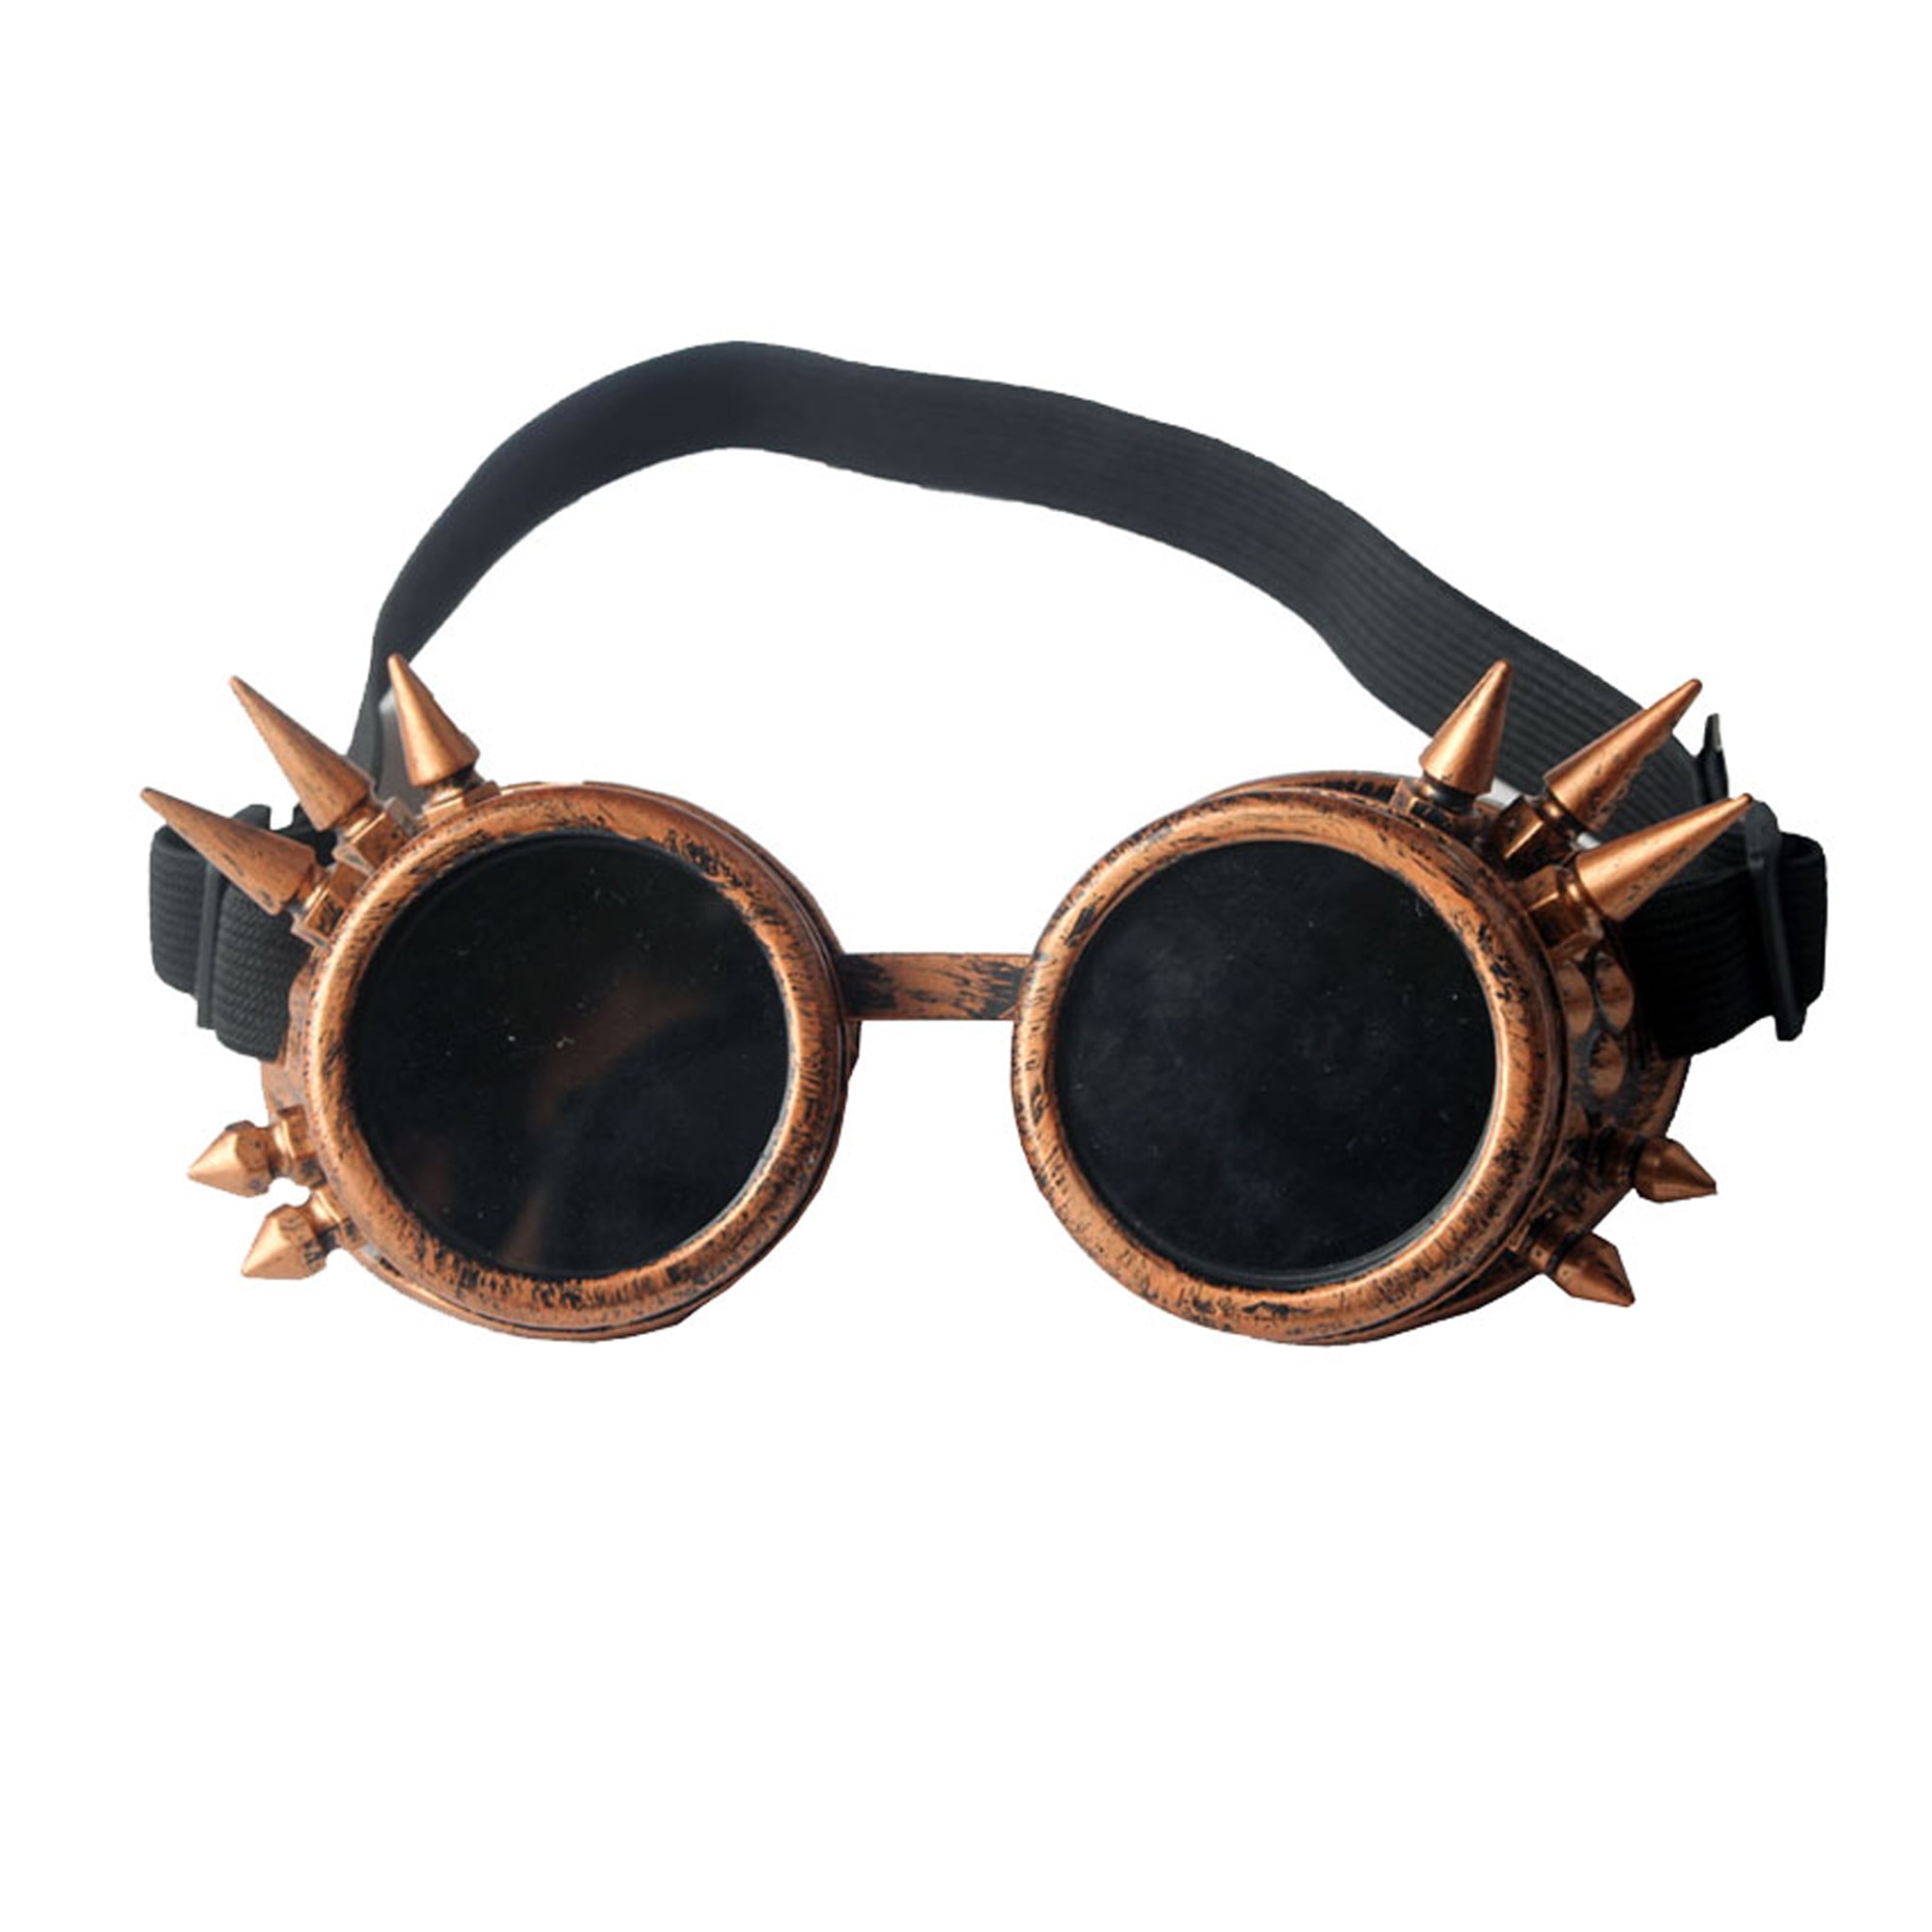 Retro Cyber Steampunk Glasses Unisex Welding Cosplay Costume Punk Gothic Goggles